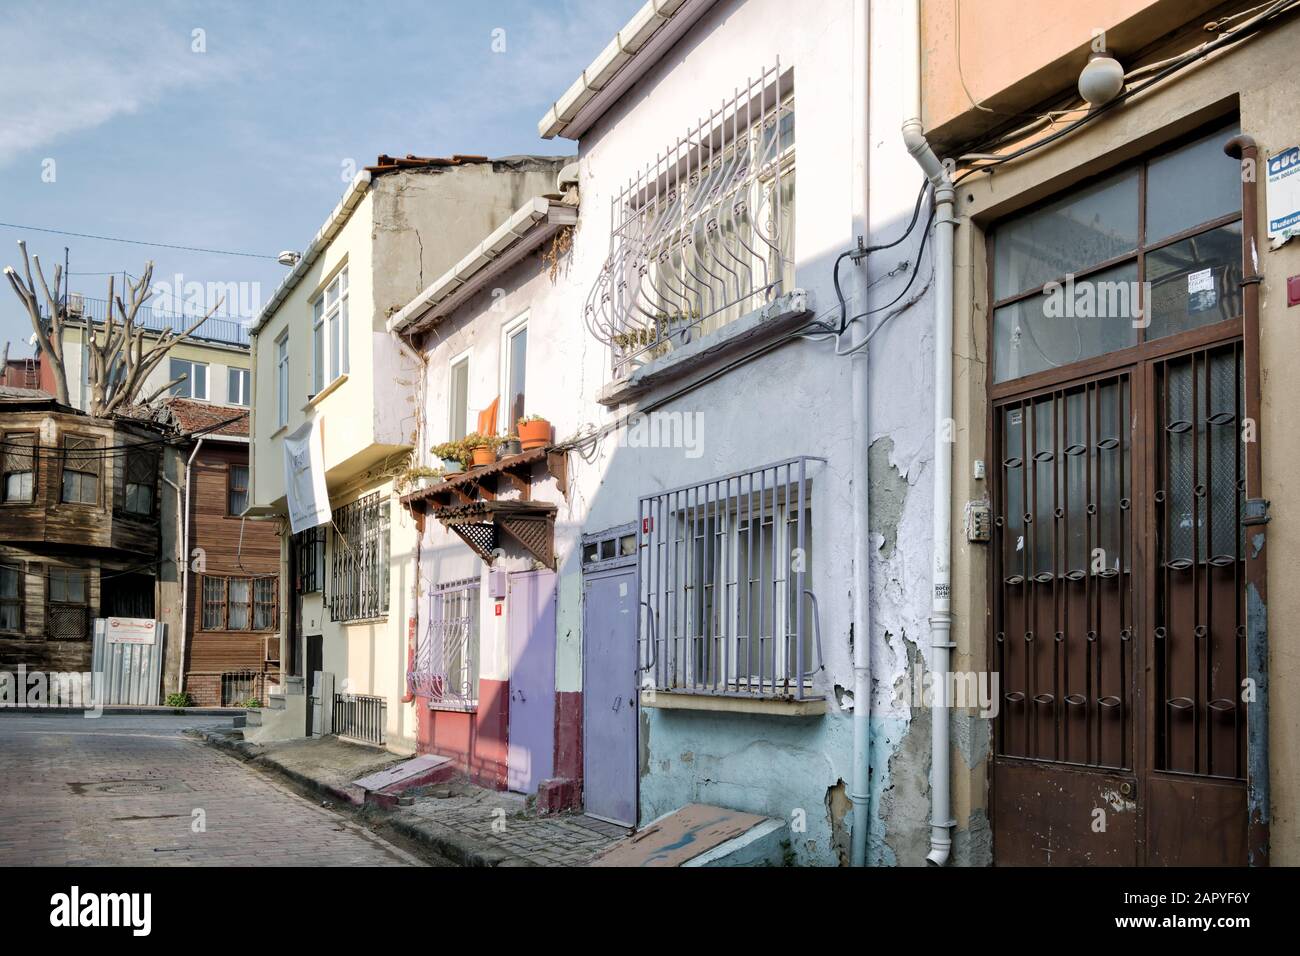 Istanbul, Turkey - January 14, 2020: old traditional houses in historical Fatih area of Istanbul Stock Photo